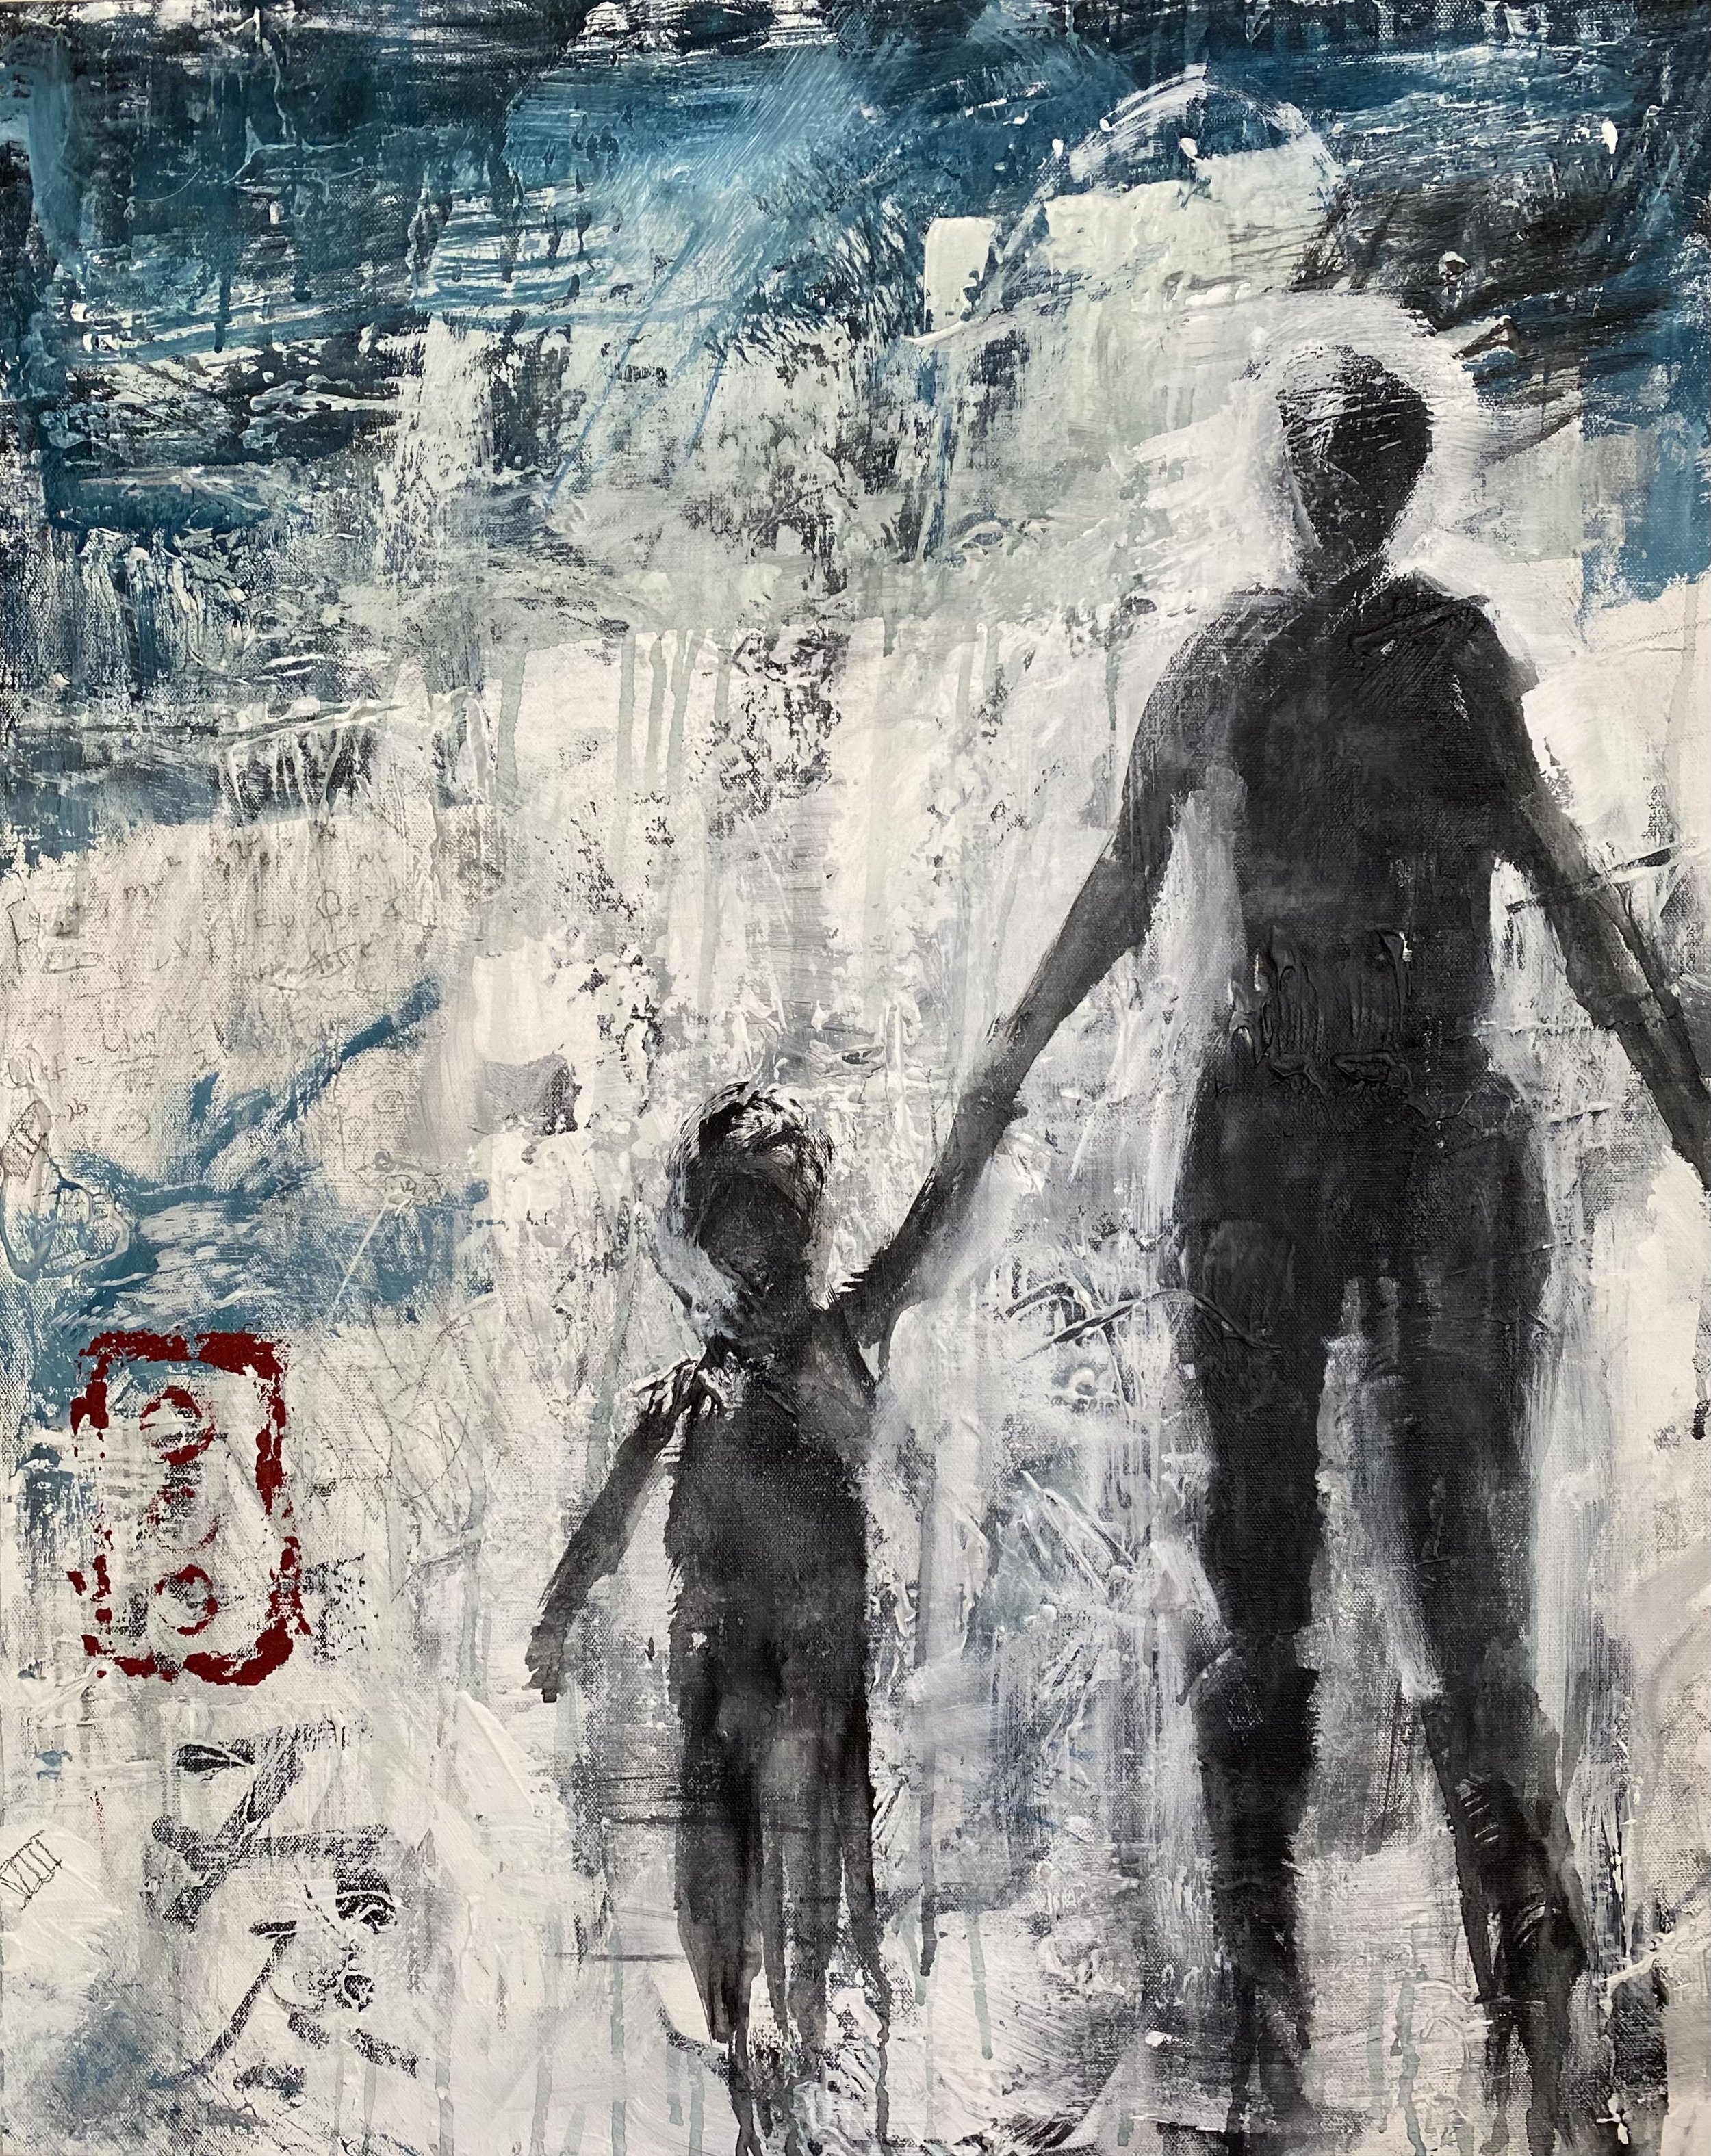 Mother and Child, 30" by 24", Acrylic on canvas